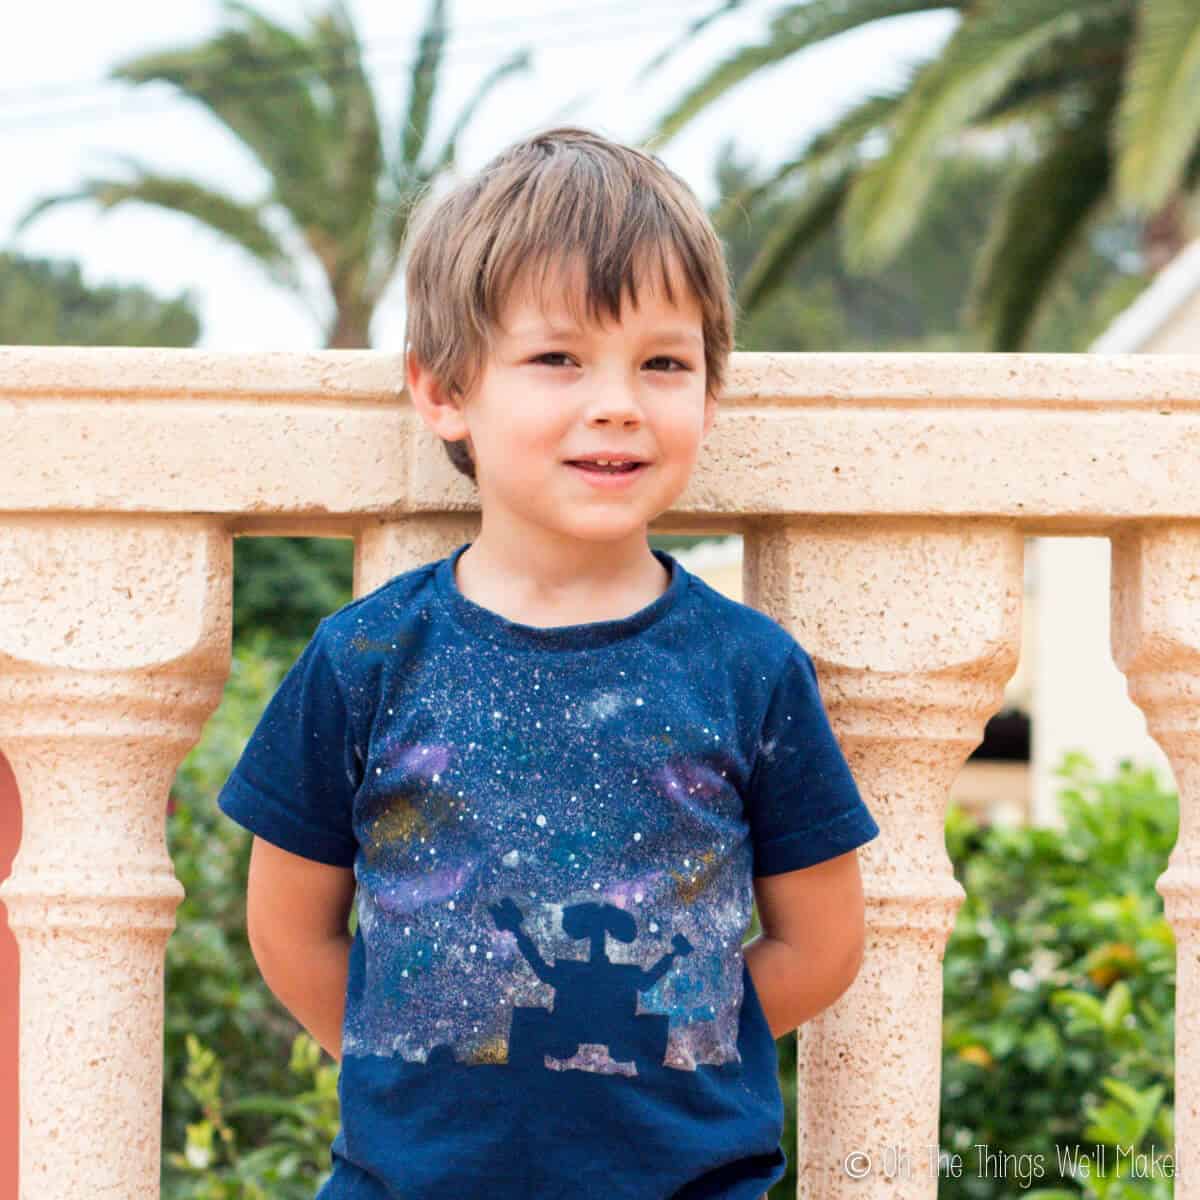 Boy wearing a handmade navy blue t-shirt with a silhouette of Wall-E and a starry galaxy background.